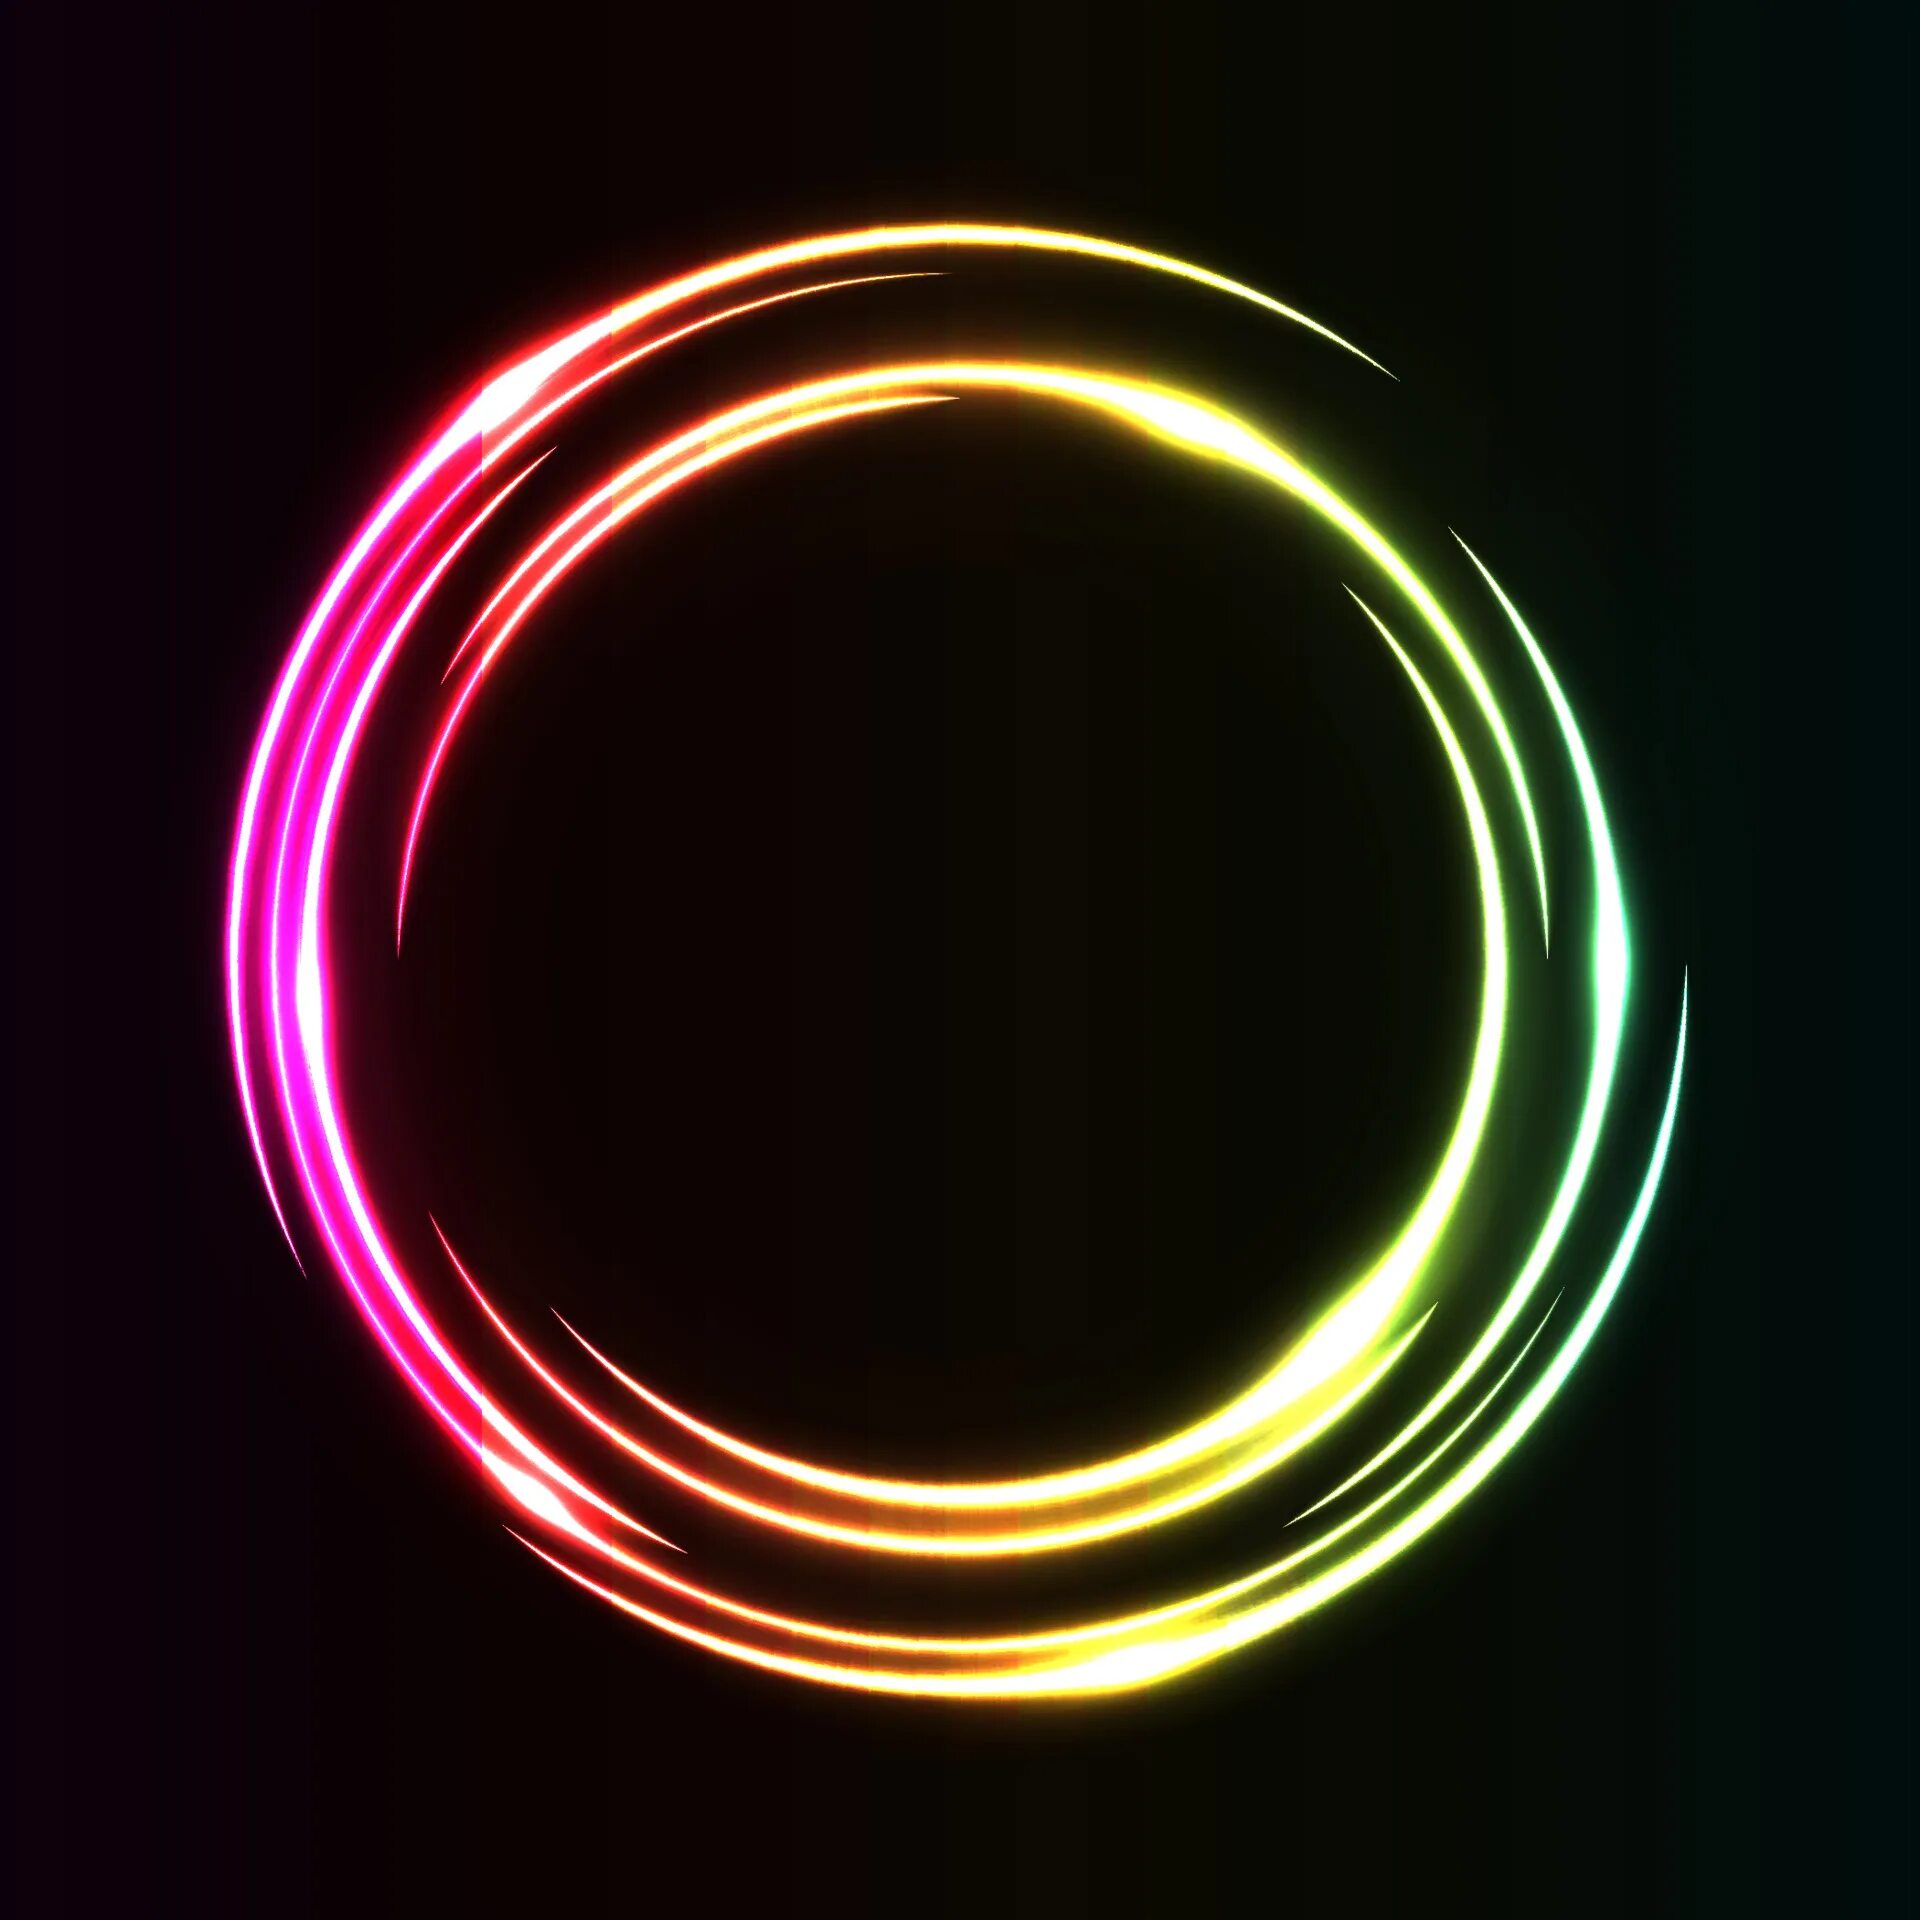 Event orb. Neon Ring. Illuminated Rings q7. Abstract circle vector.